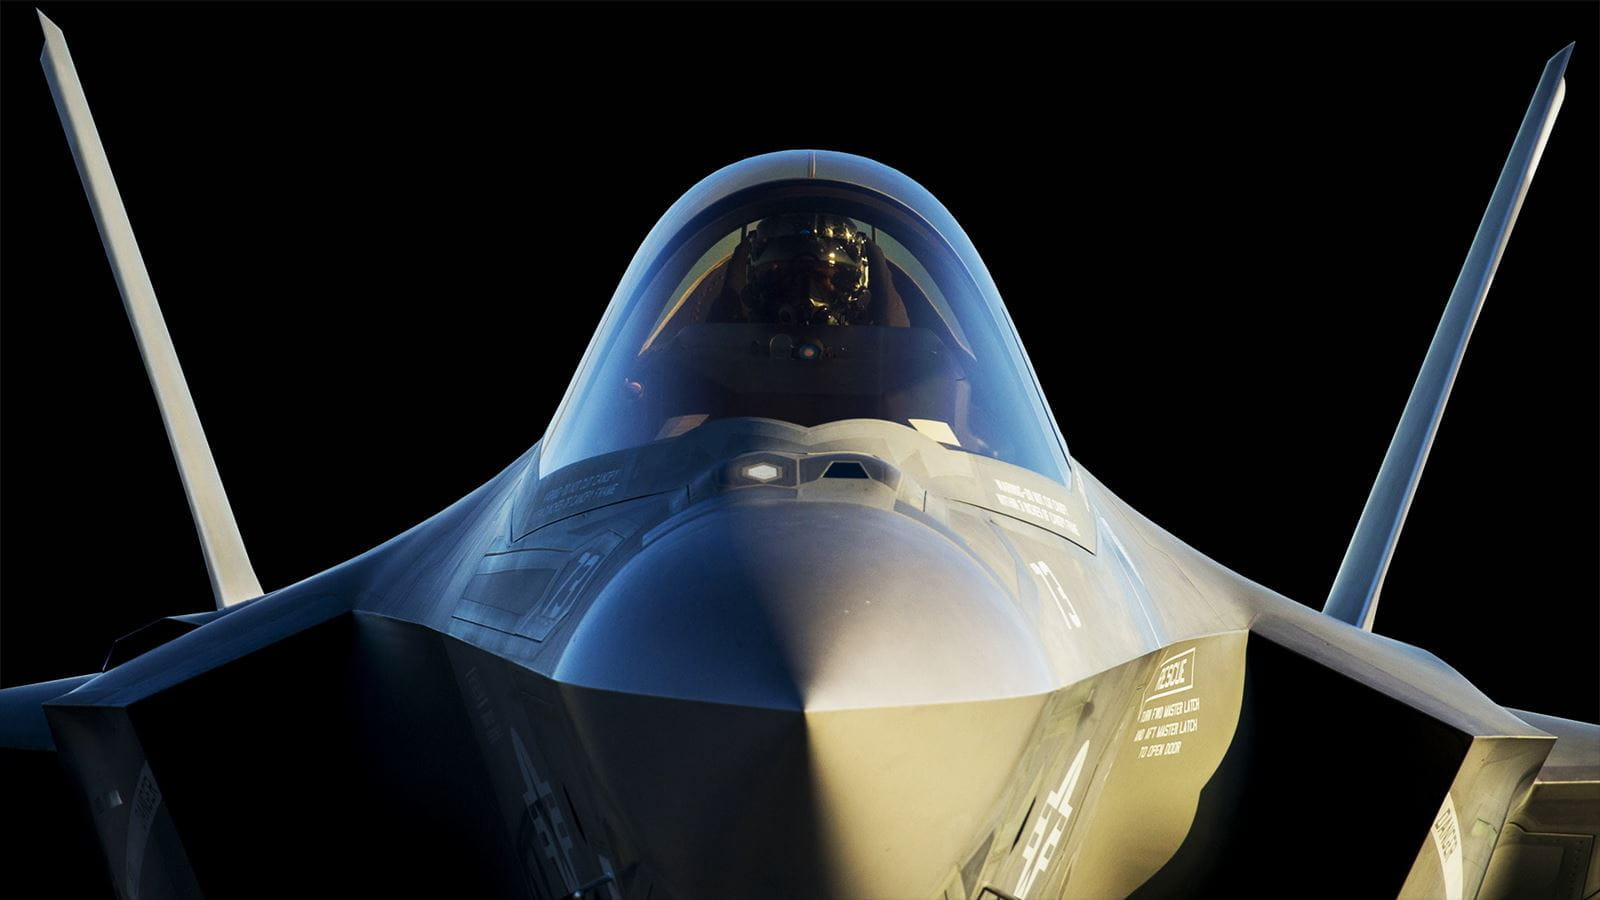 Collins Elbit Vision Systems F-35 Gen III HMDS is the world’s most advanced helmet-mounted display system and provides pilots in combat zones unmatched situational awareness